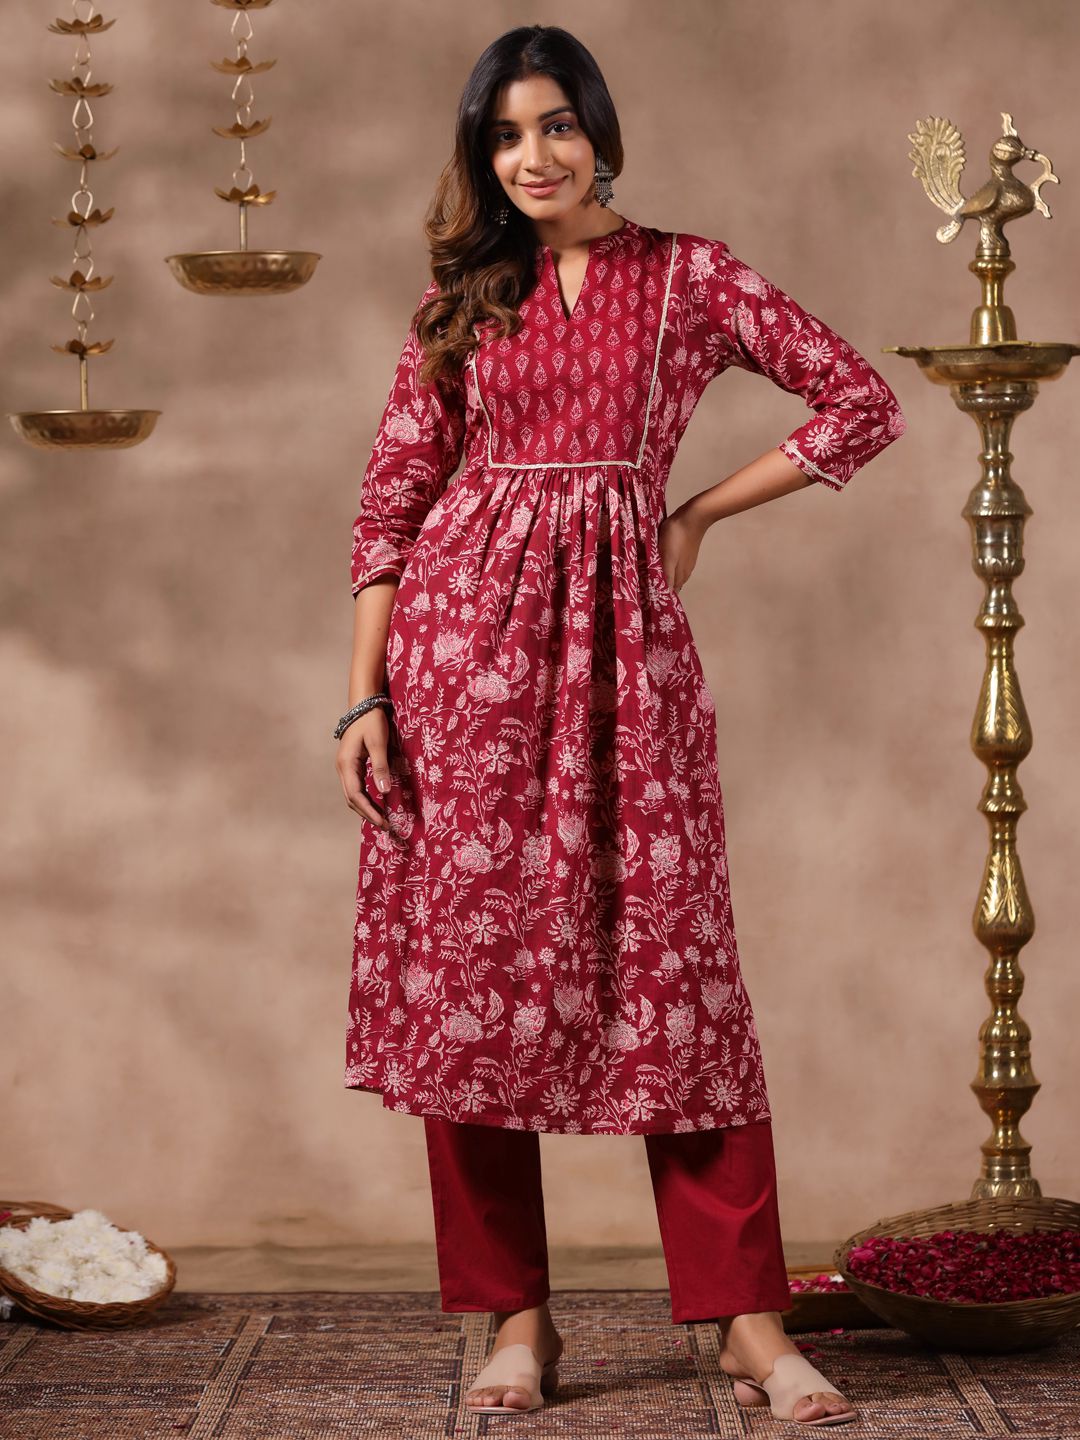     			Anubhutee Cotton Printed Kurti With Pants Women's Stitched Salwar Suit - Red ( Pack of 1 )